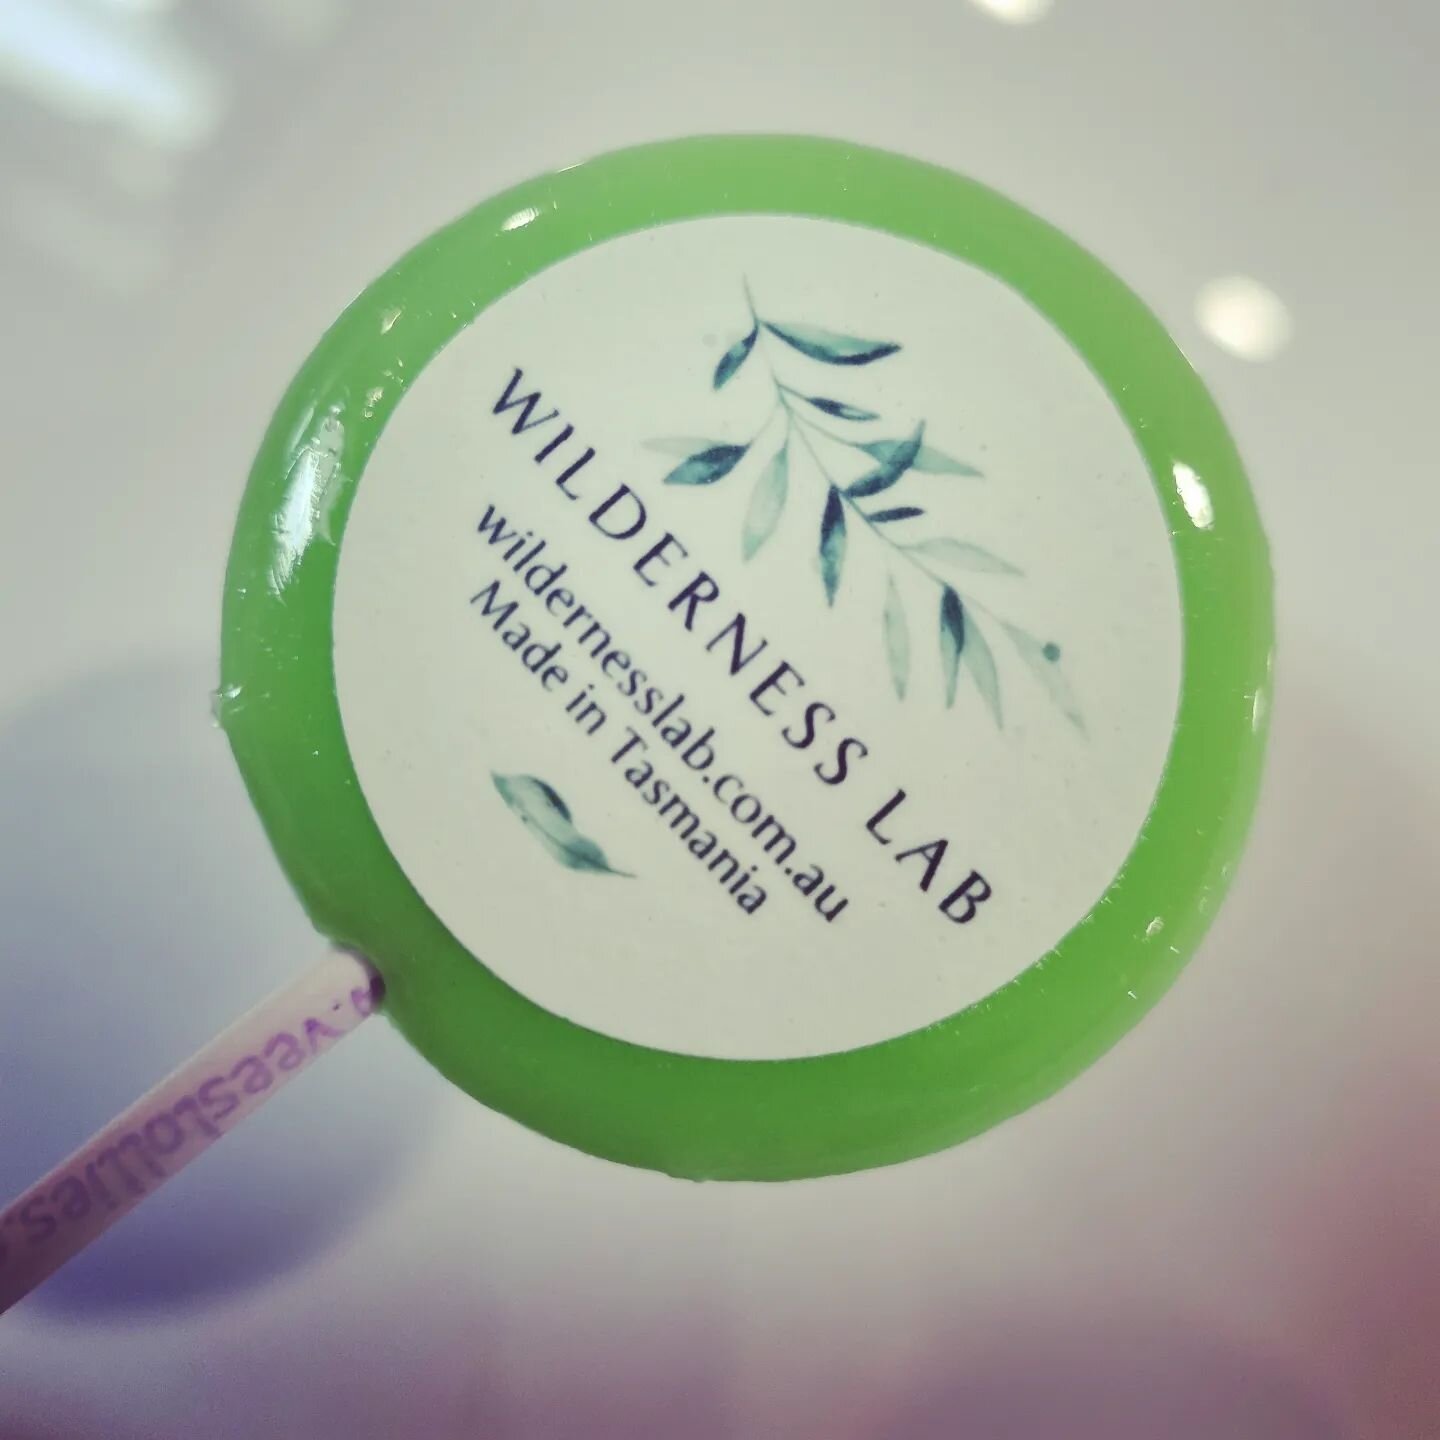 Super cute promo lollipops!! Habdmade by me in a sweet cotton candy flavour

 @wildernesslab 
Go check out her site and page. Awesome stuff!!

#sweets
#promotionalproducts #lollipop #handmadeinaustralia #sugar #glutenfree #vegantreat